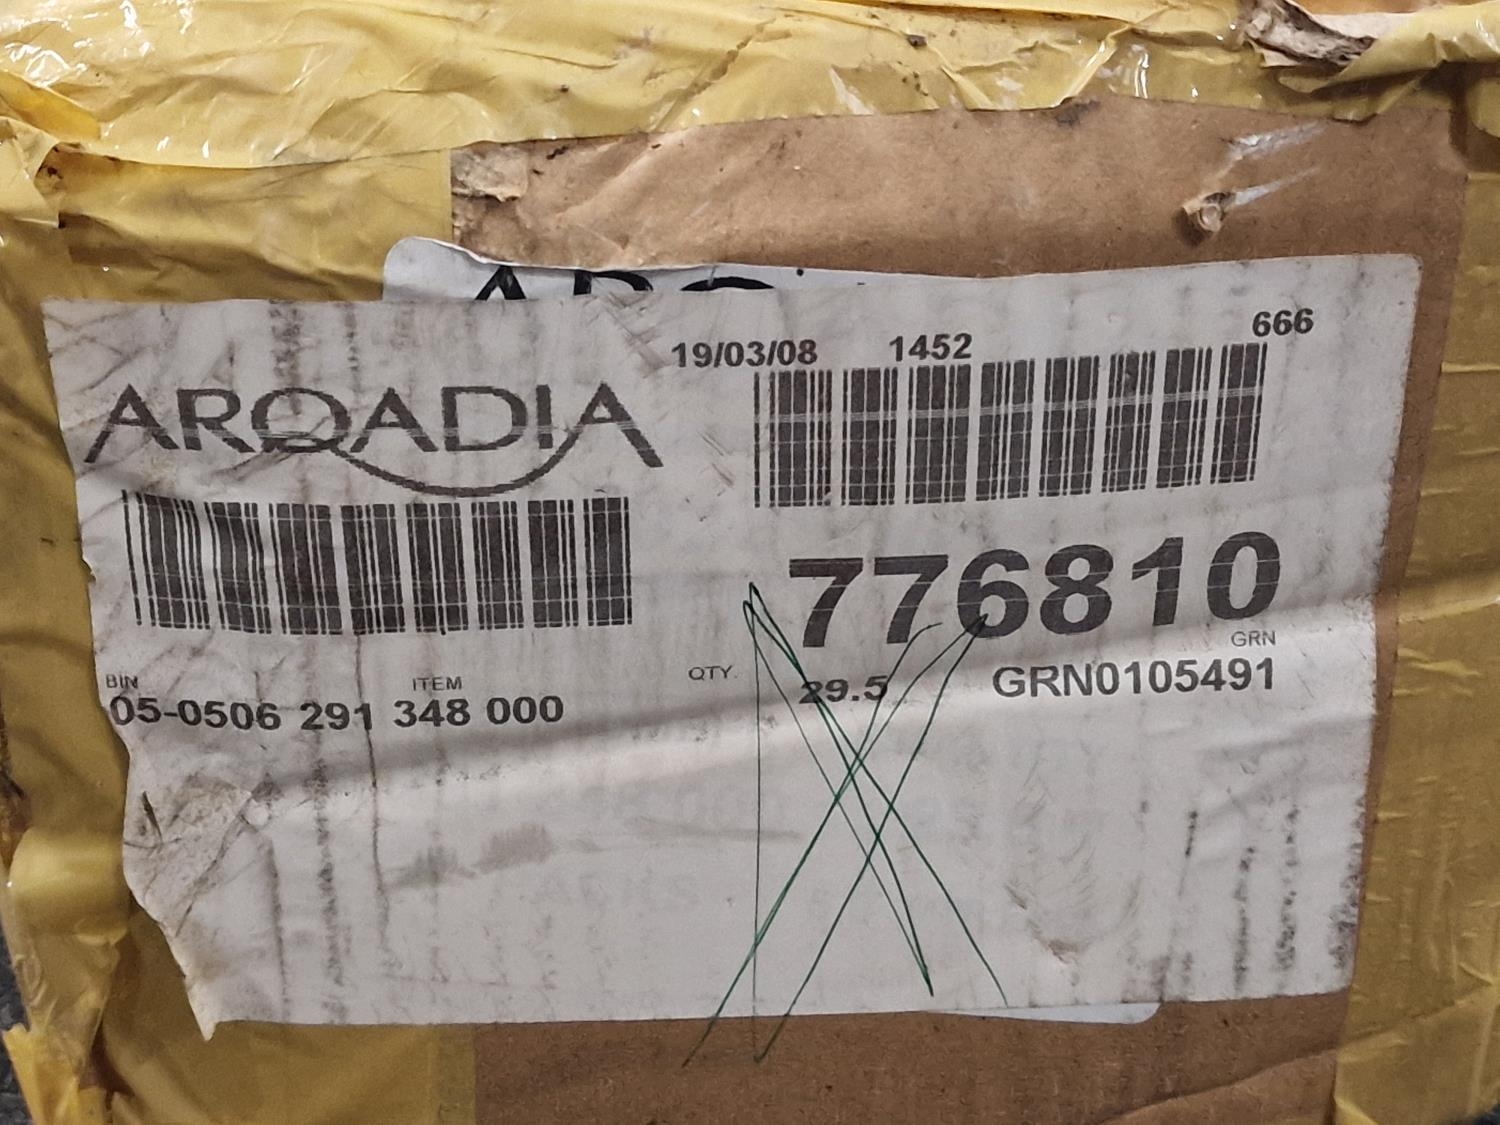 Two boxes of Arqadia picture frame wood mouldings 300cm in length. One box has been opened with a - Image 2 of 2